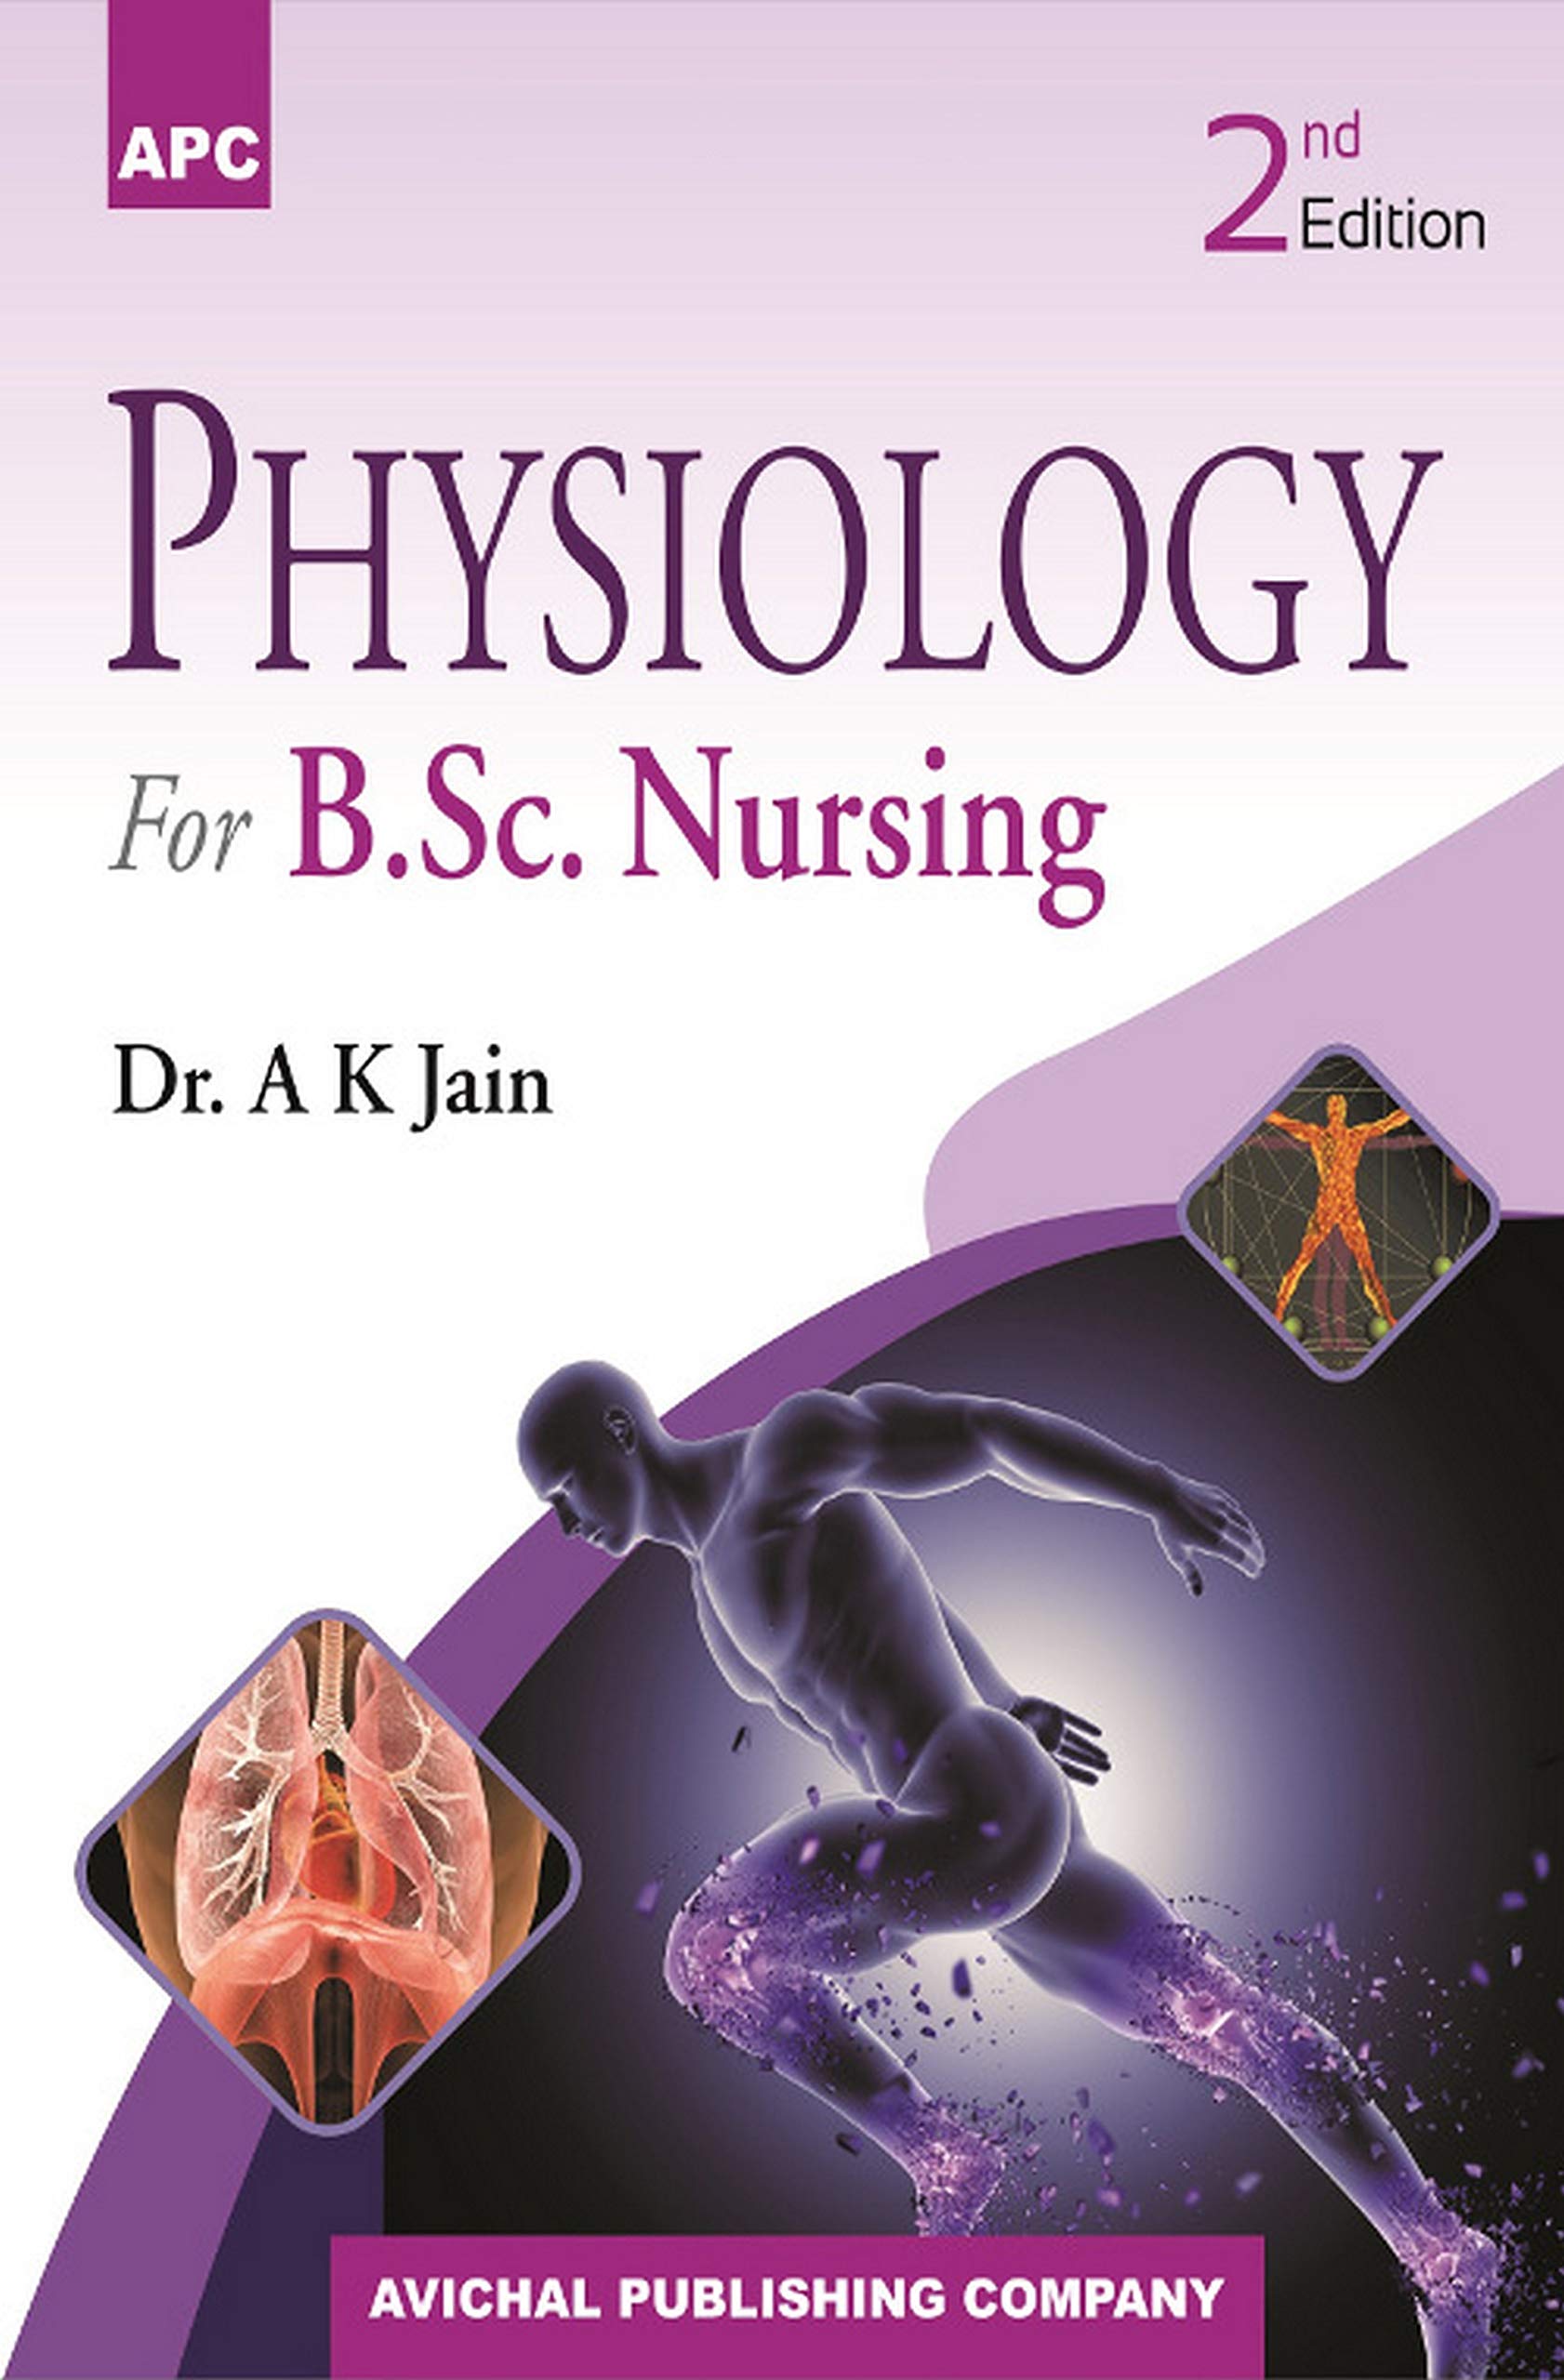 physiology-for-bsc-nursing